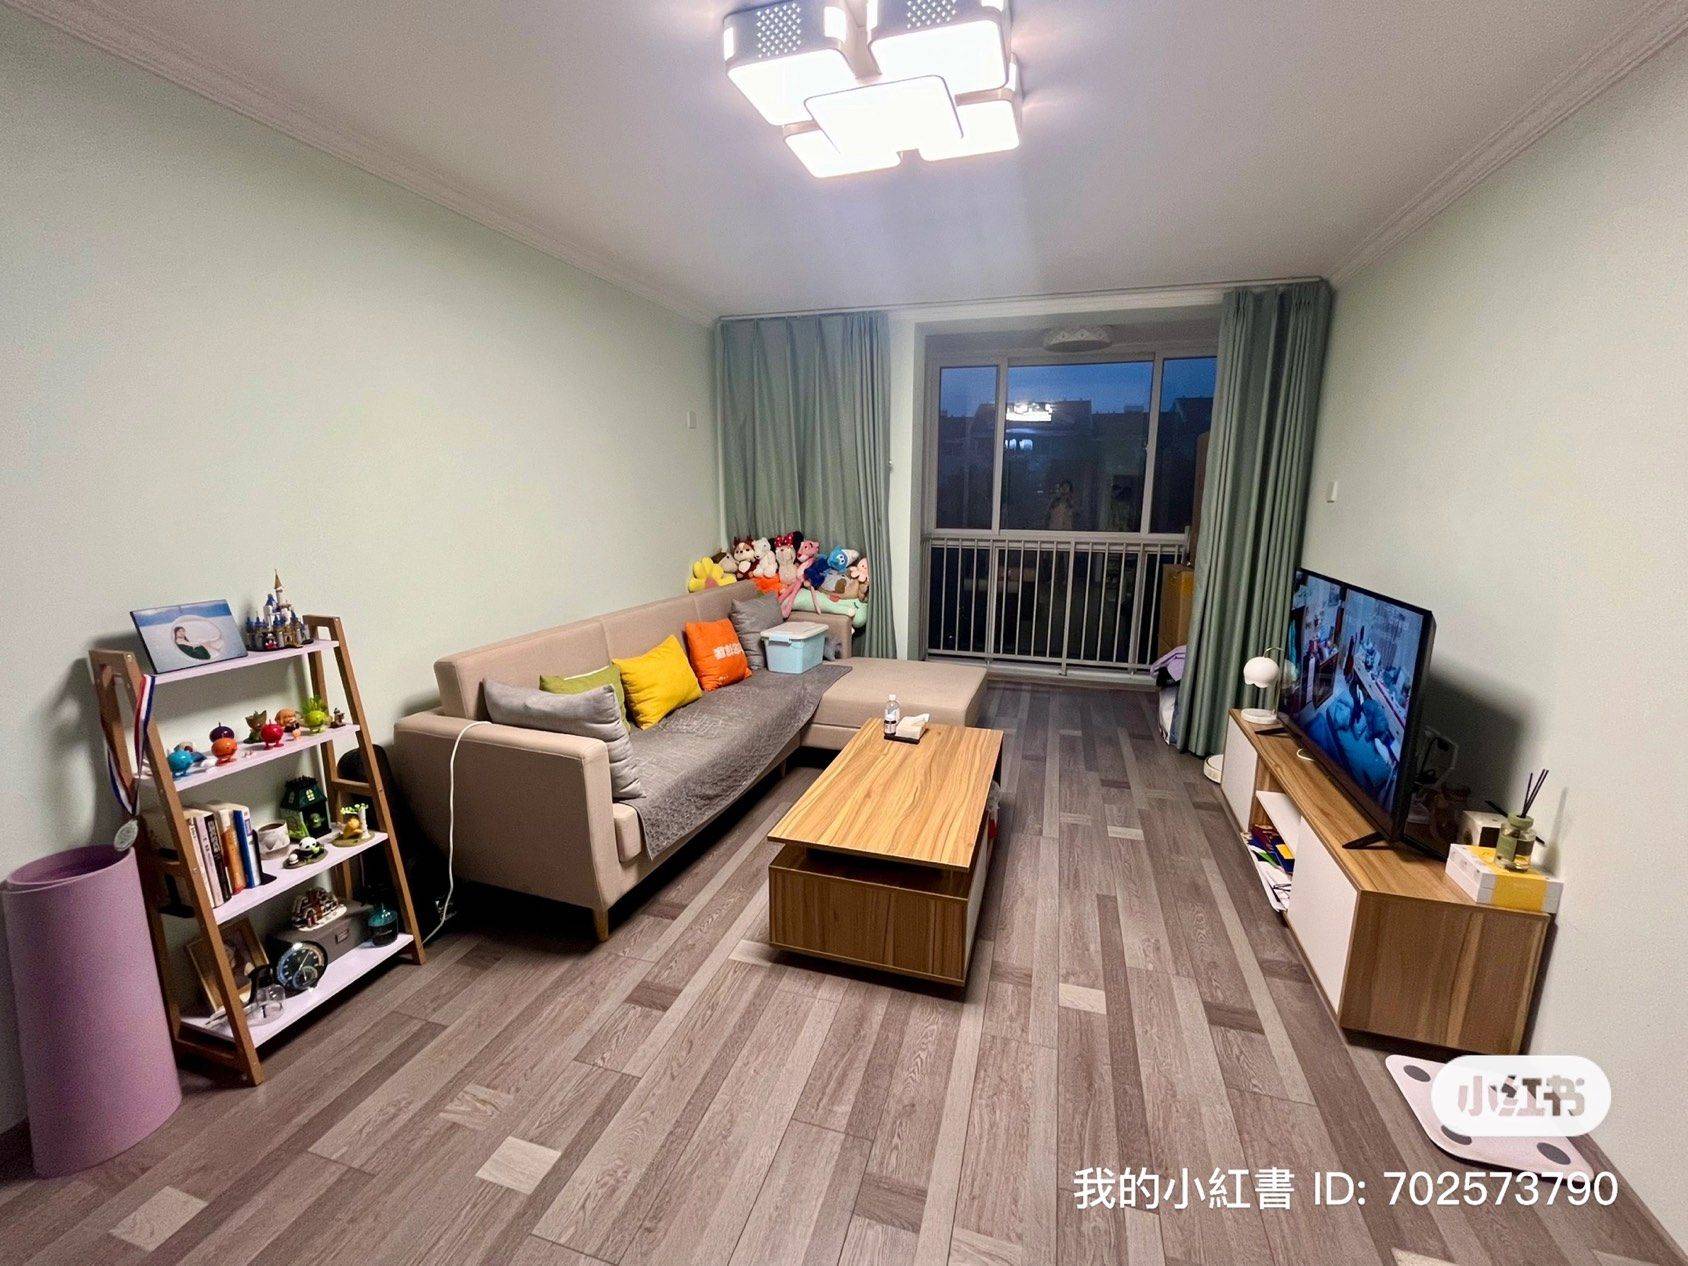 Beijing-Haidian-Cozy Home,Clean&Comfy,Chilled